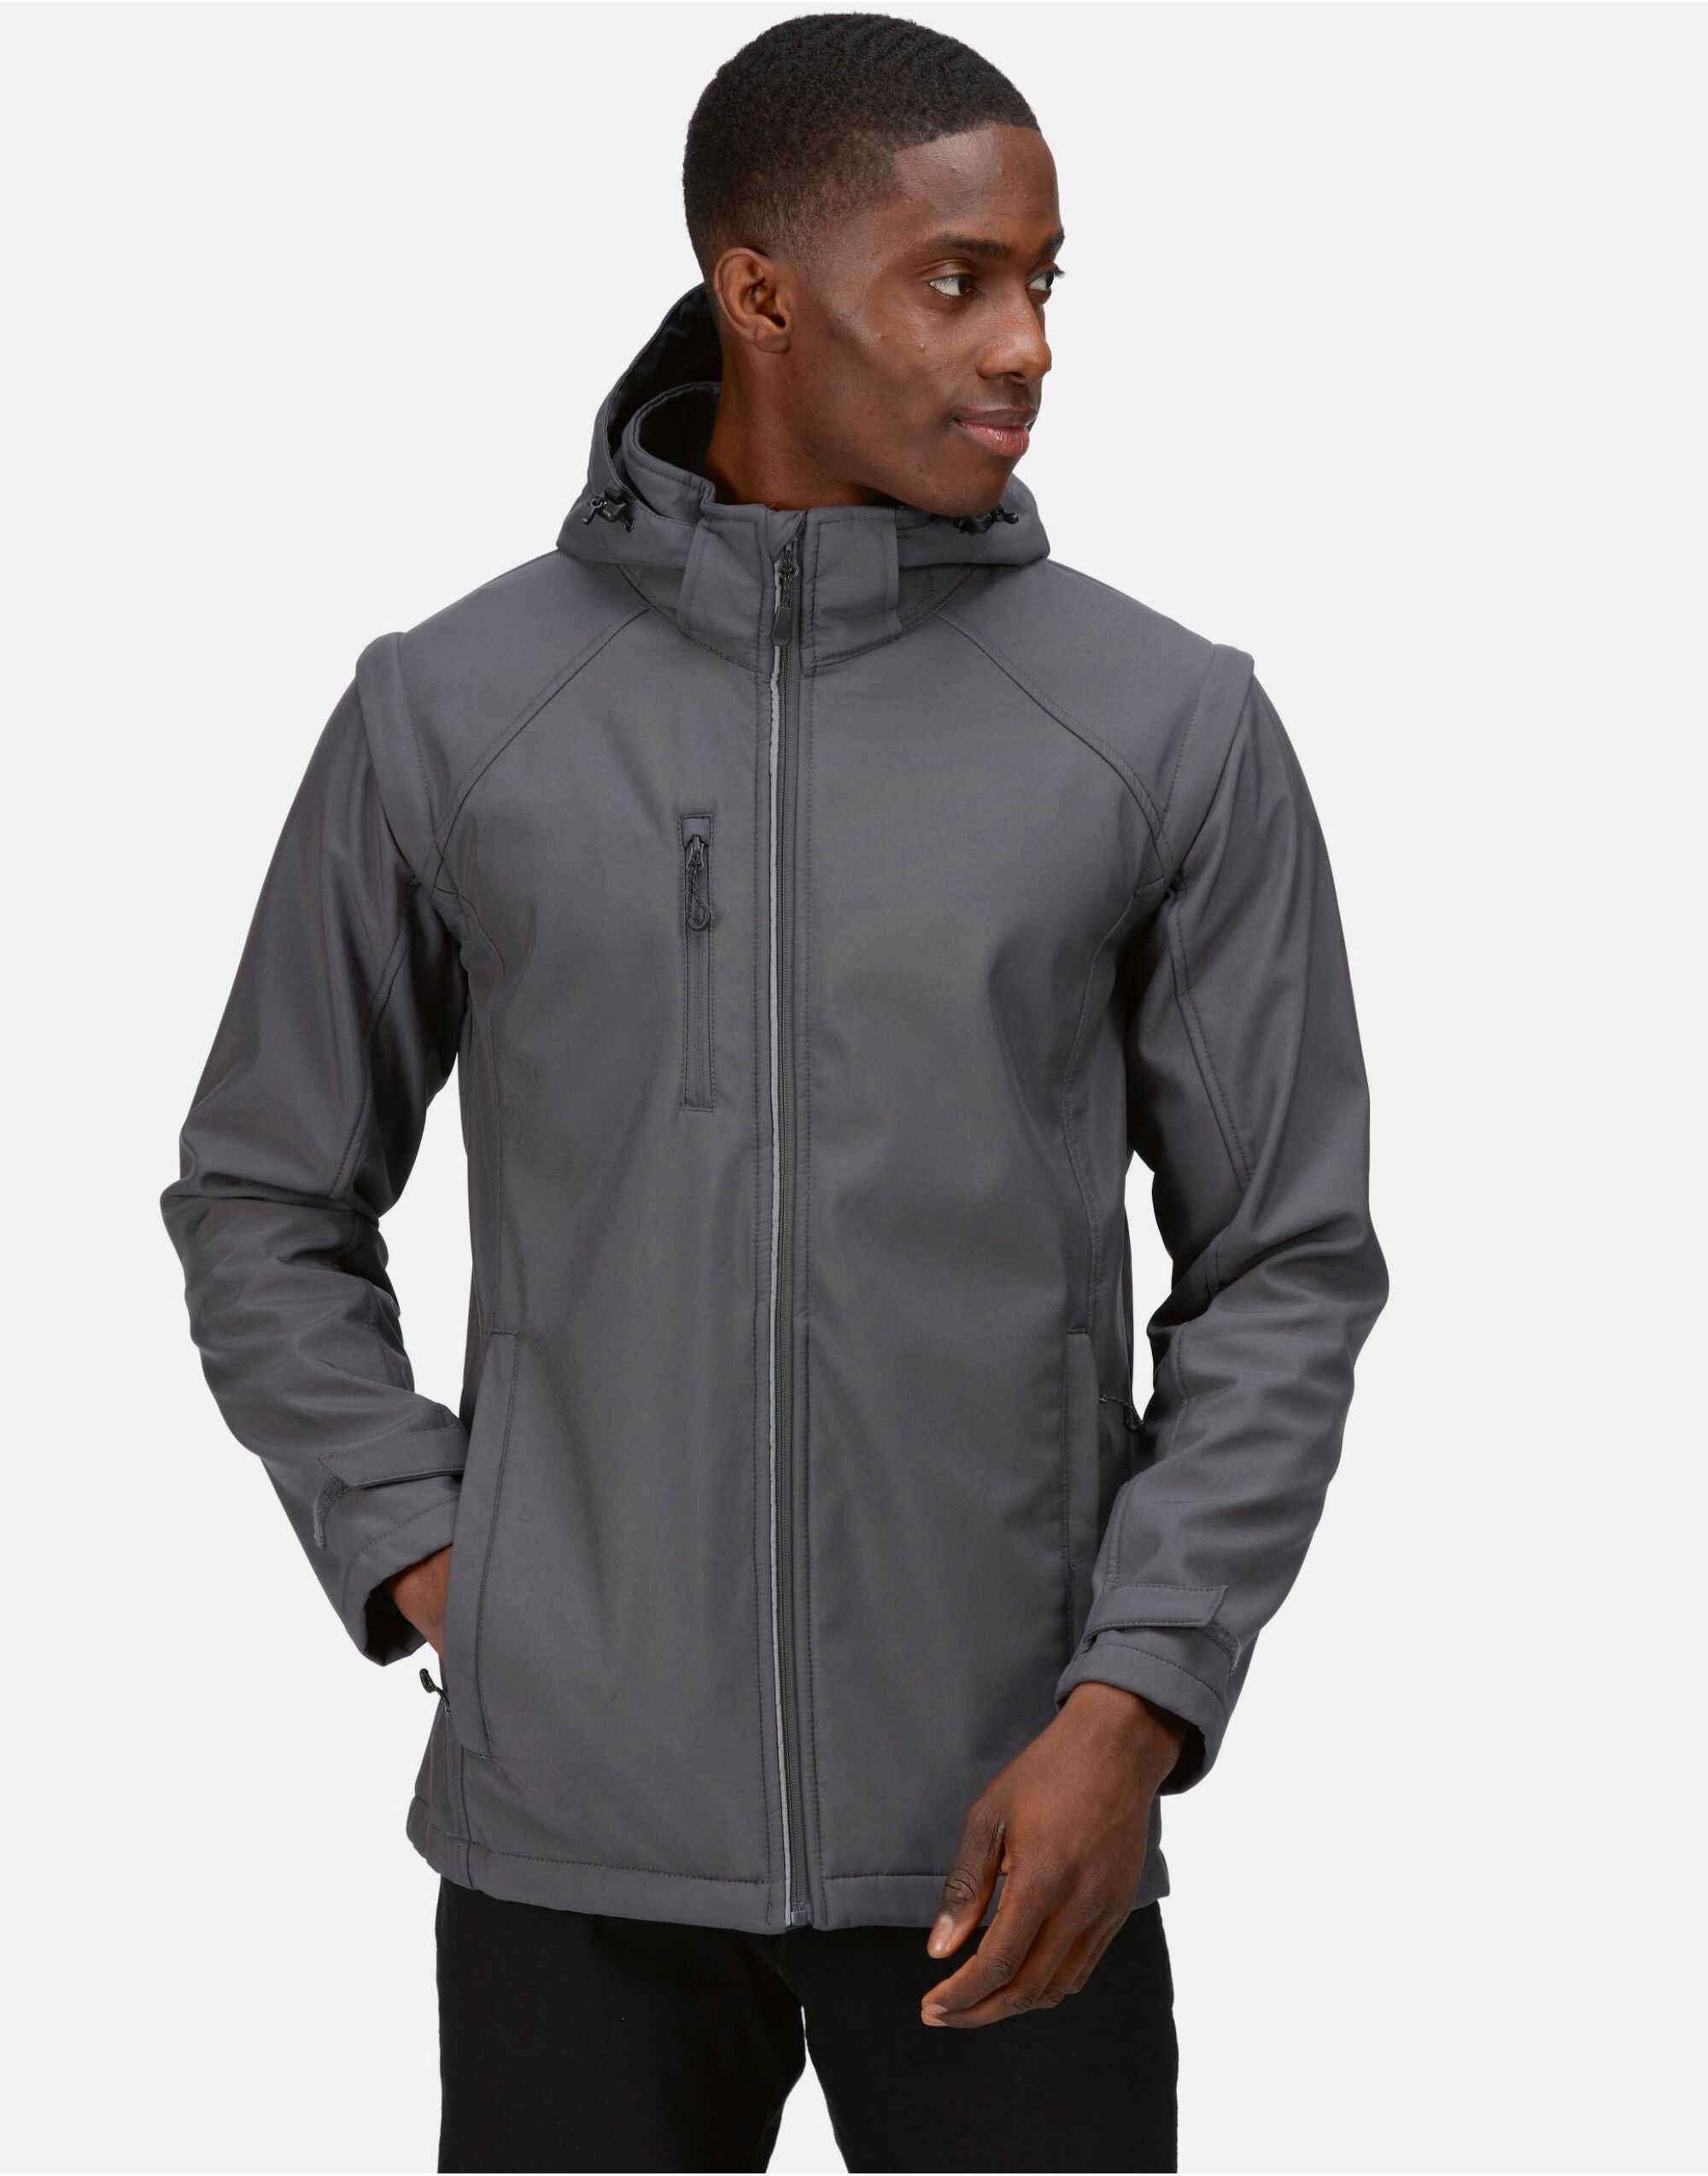 Regatta Professional Men's Erasmus 4-In-1 Softshell Jacket Warm backed woven XPT waterproof and breathable 3 layer membrane fabric (TRA713)